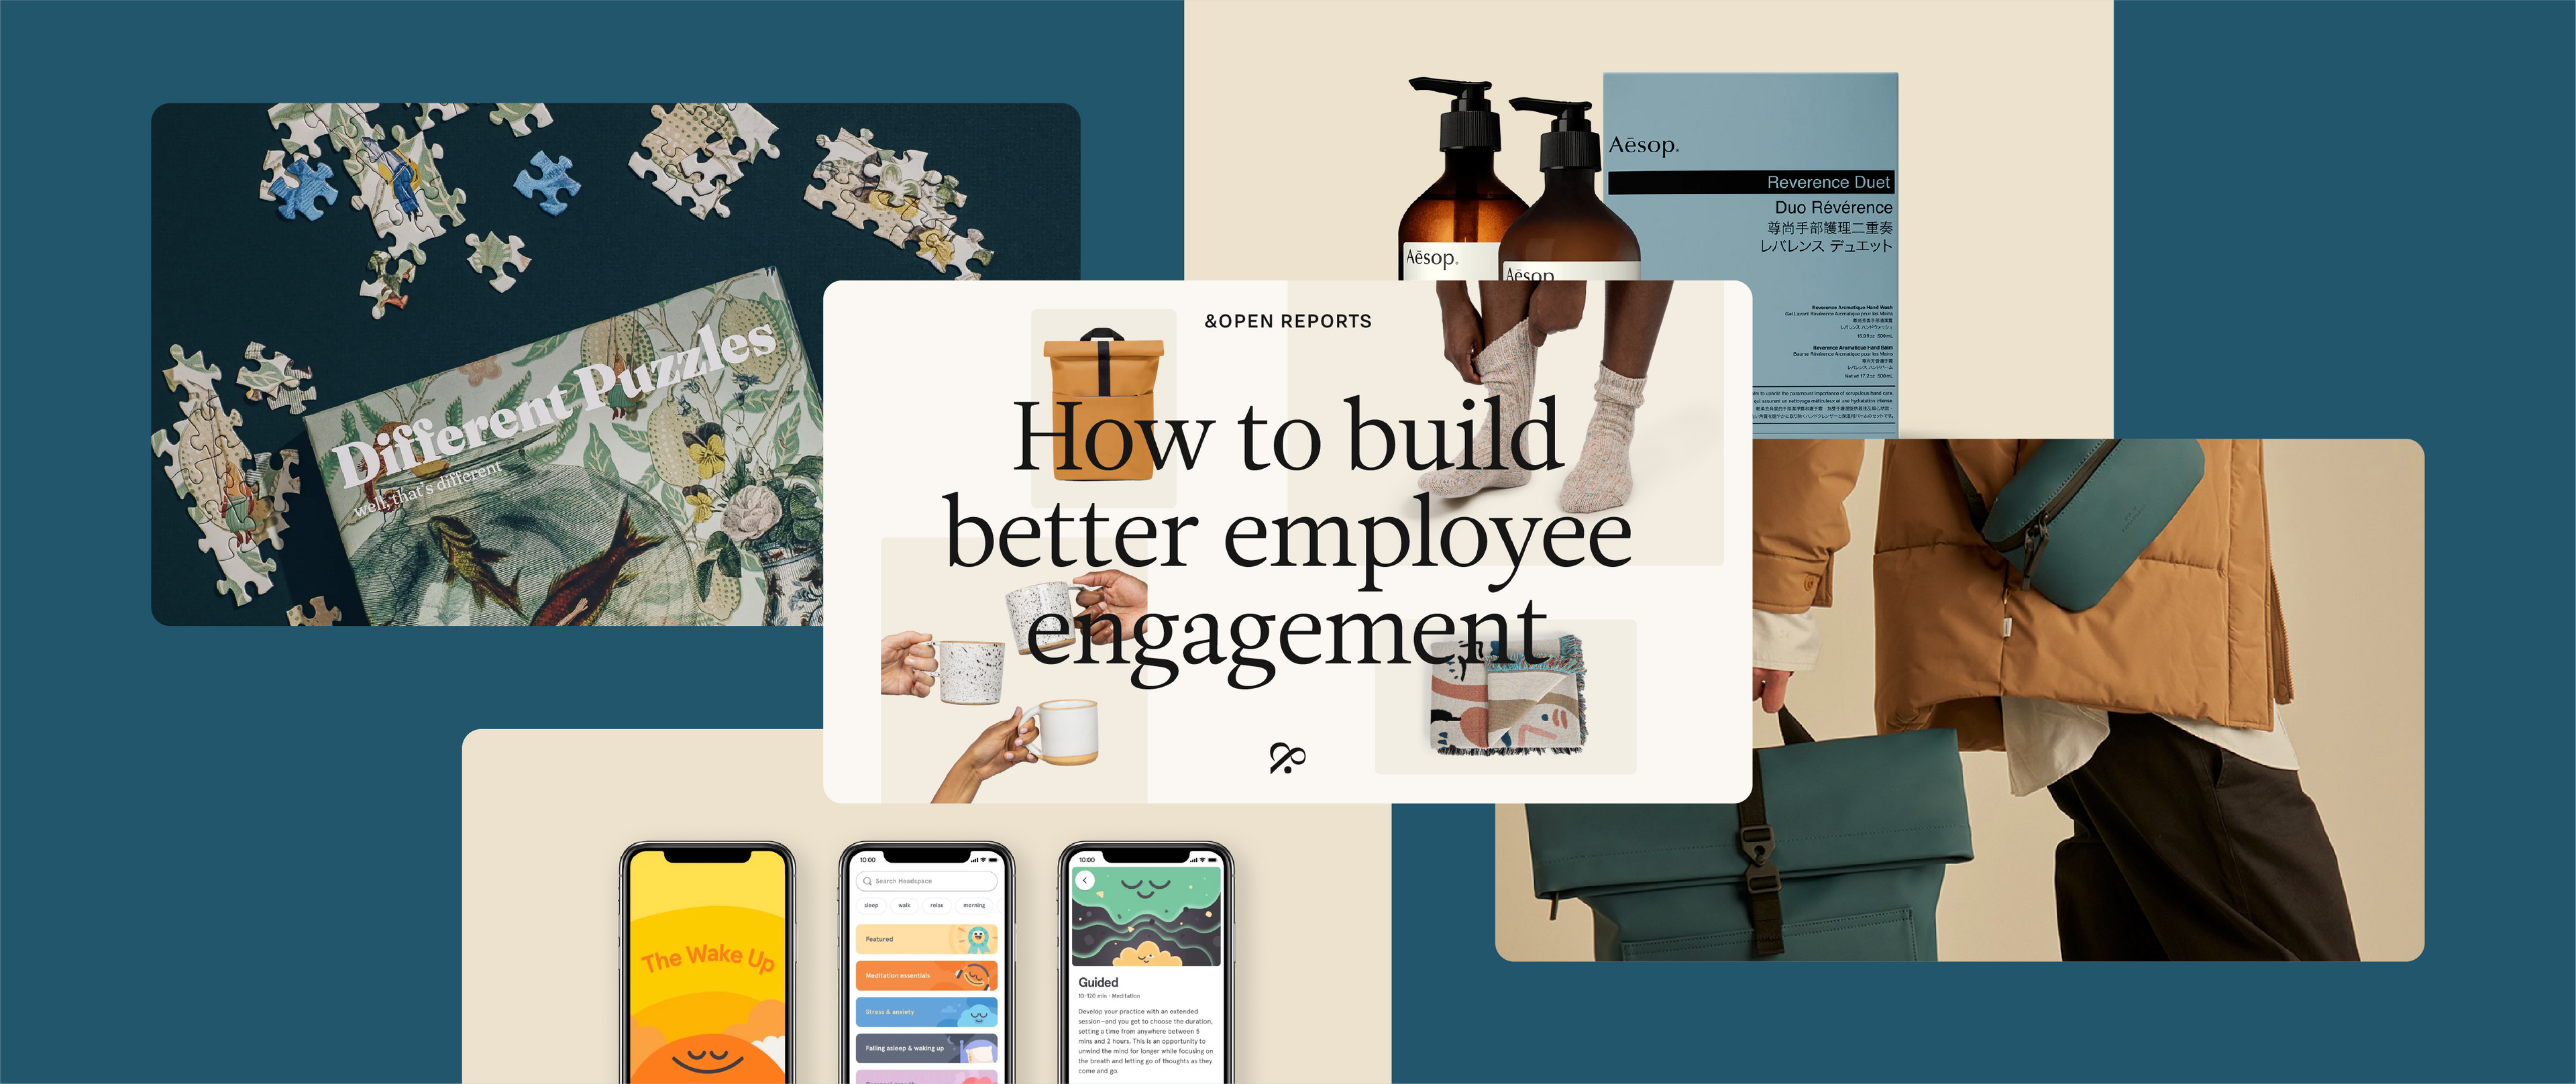 How to build better employee engagement